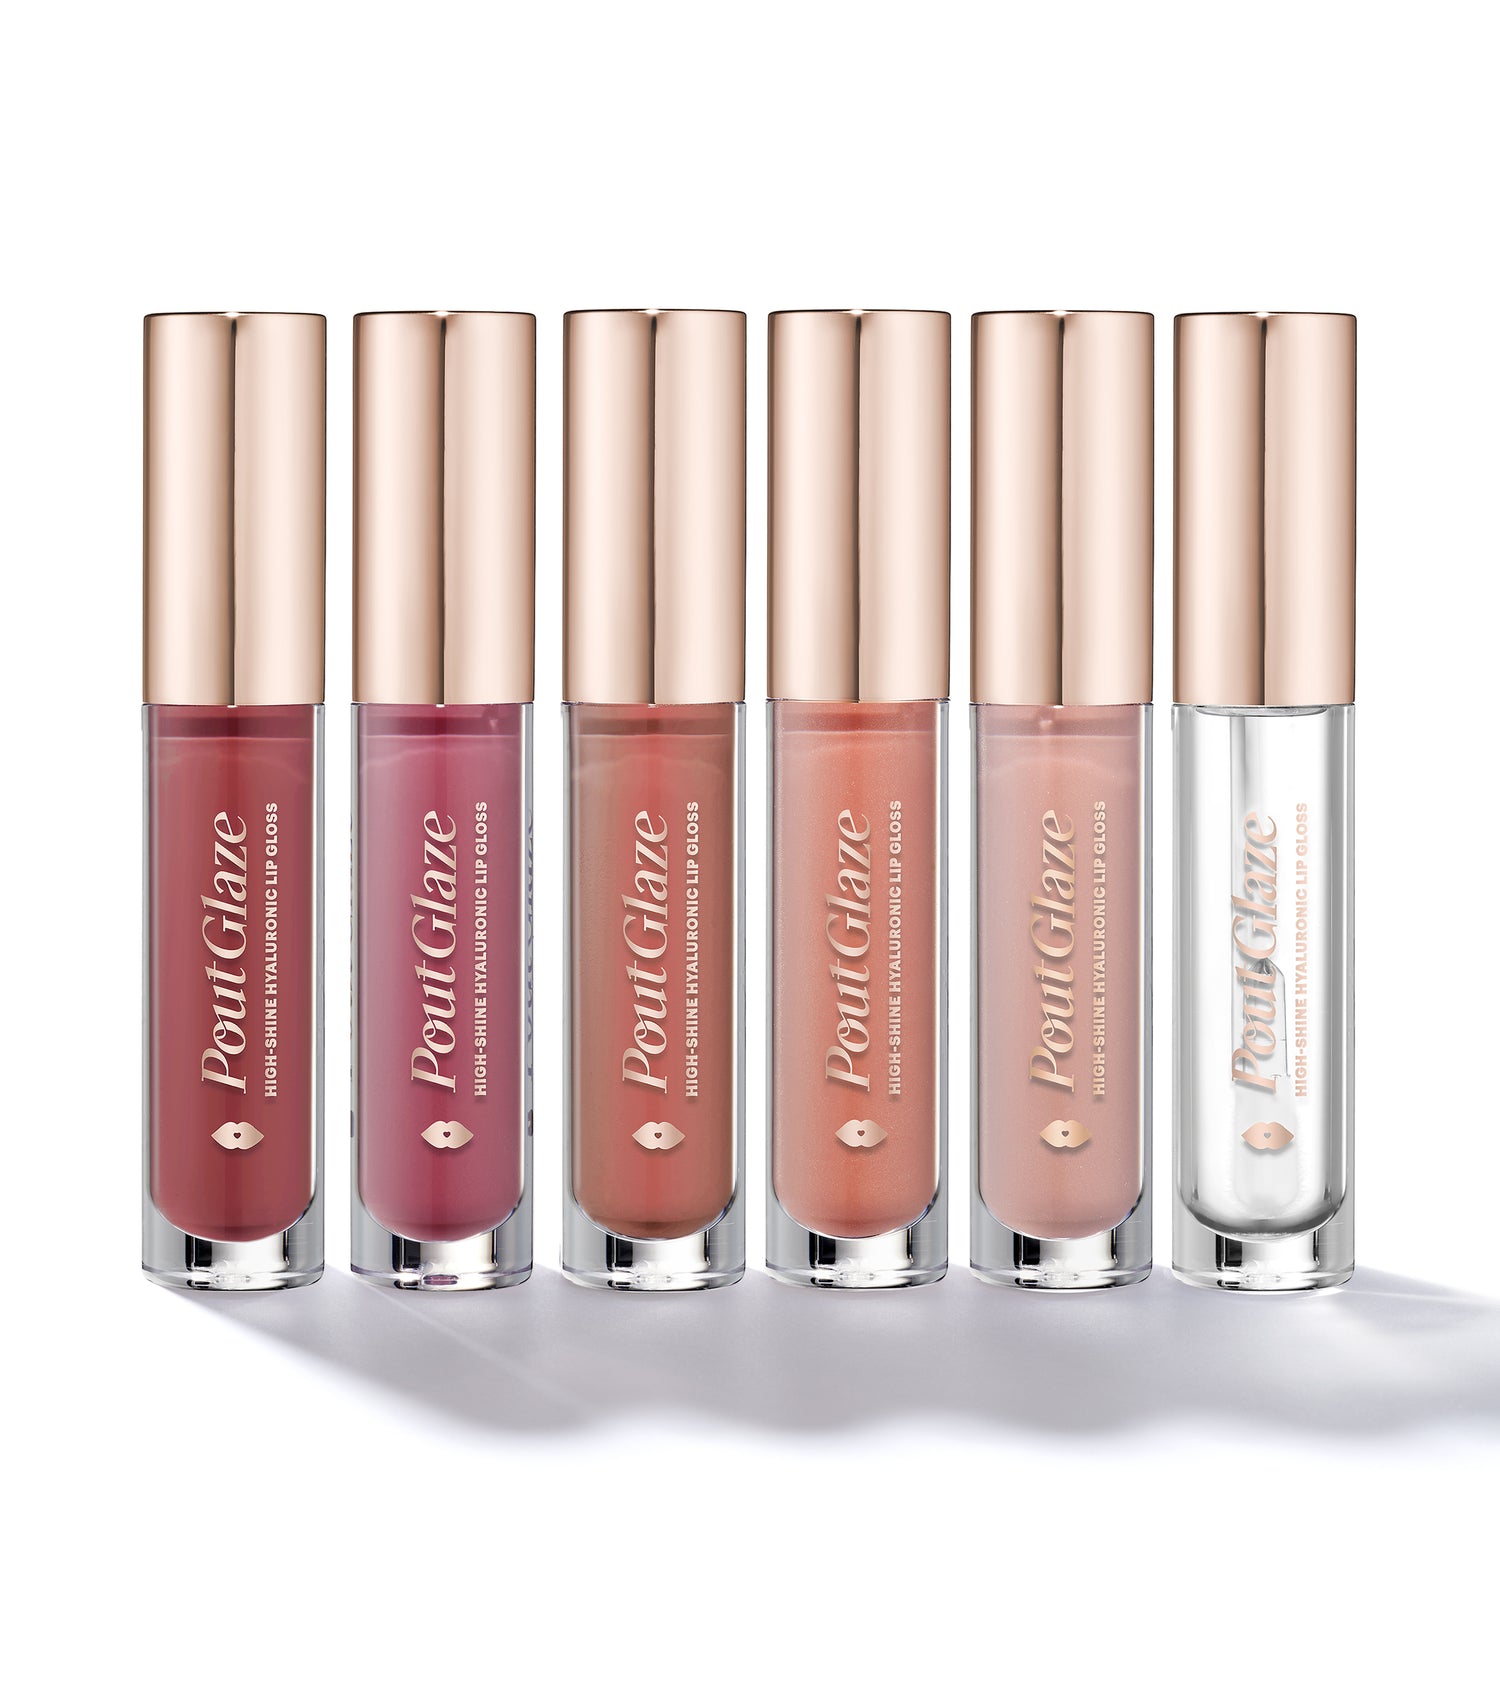 Pout Glaze High-Shine-Hyaluronic Lip Gloss (Gailey) Main Image featured